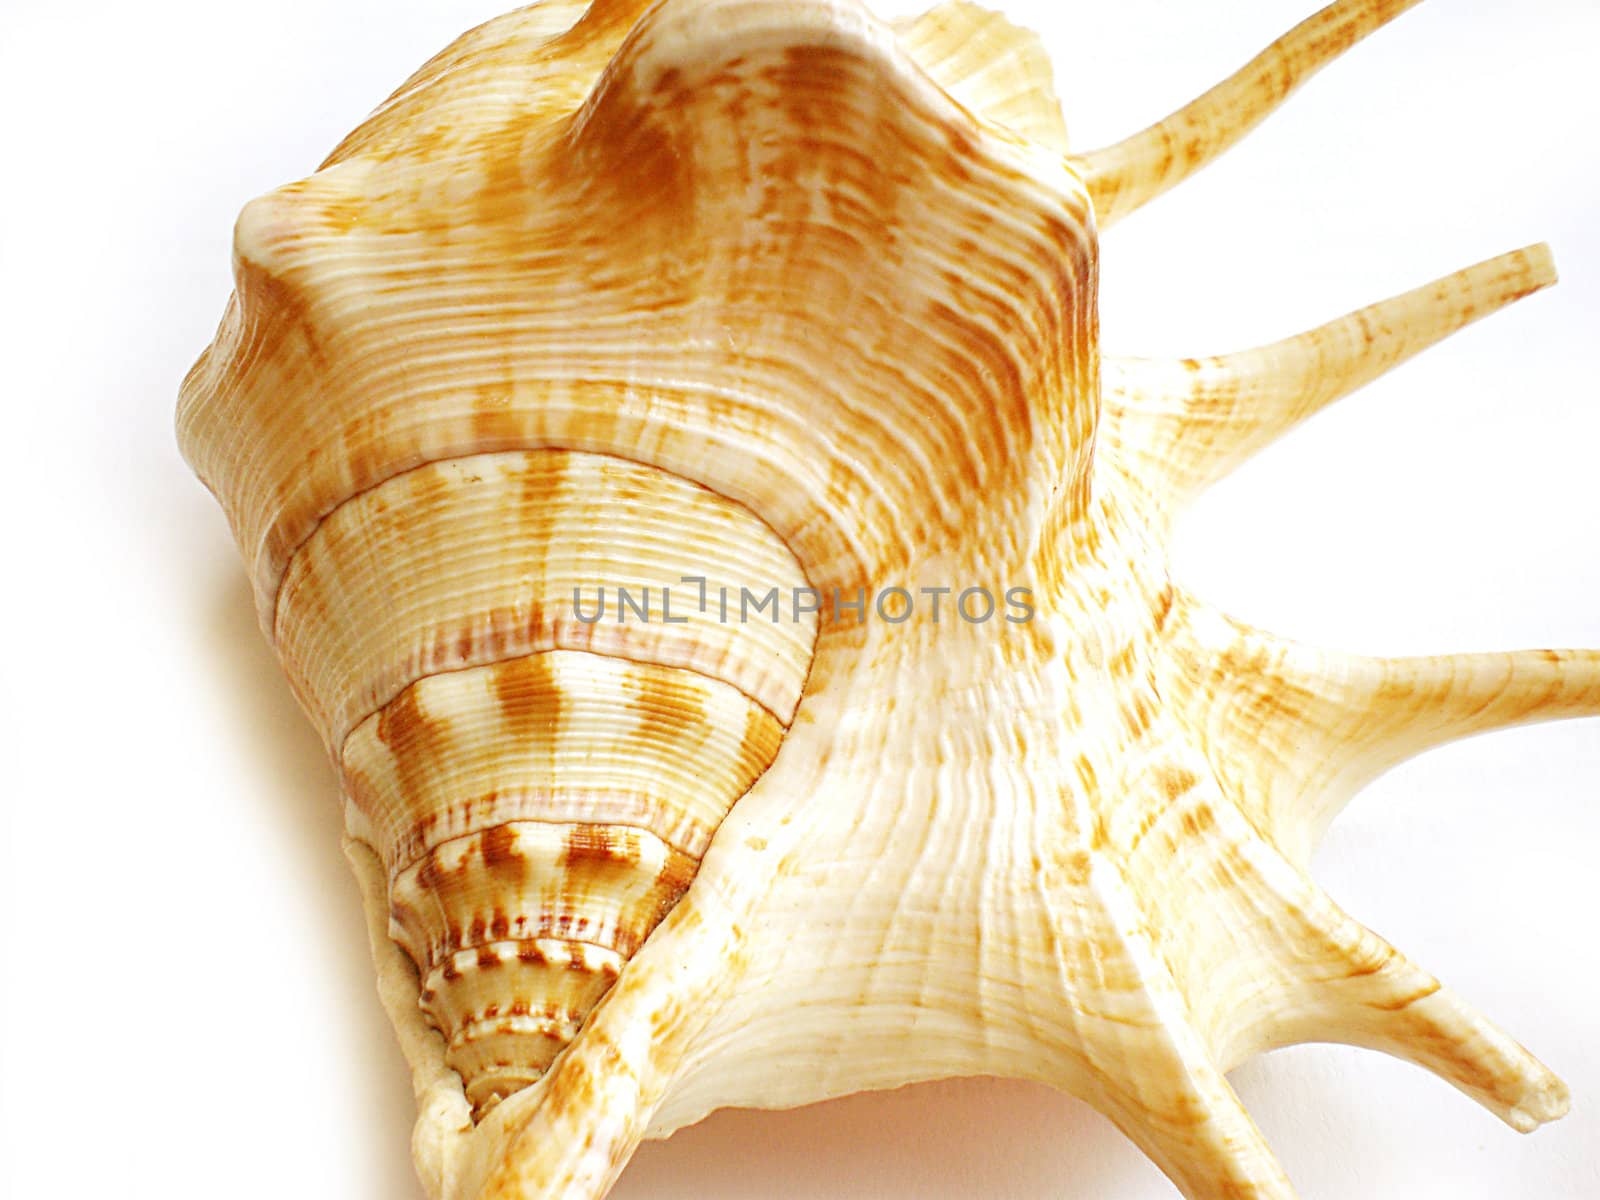 sea shell isolated on white background